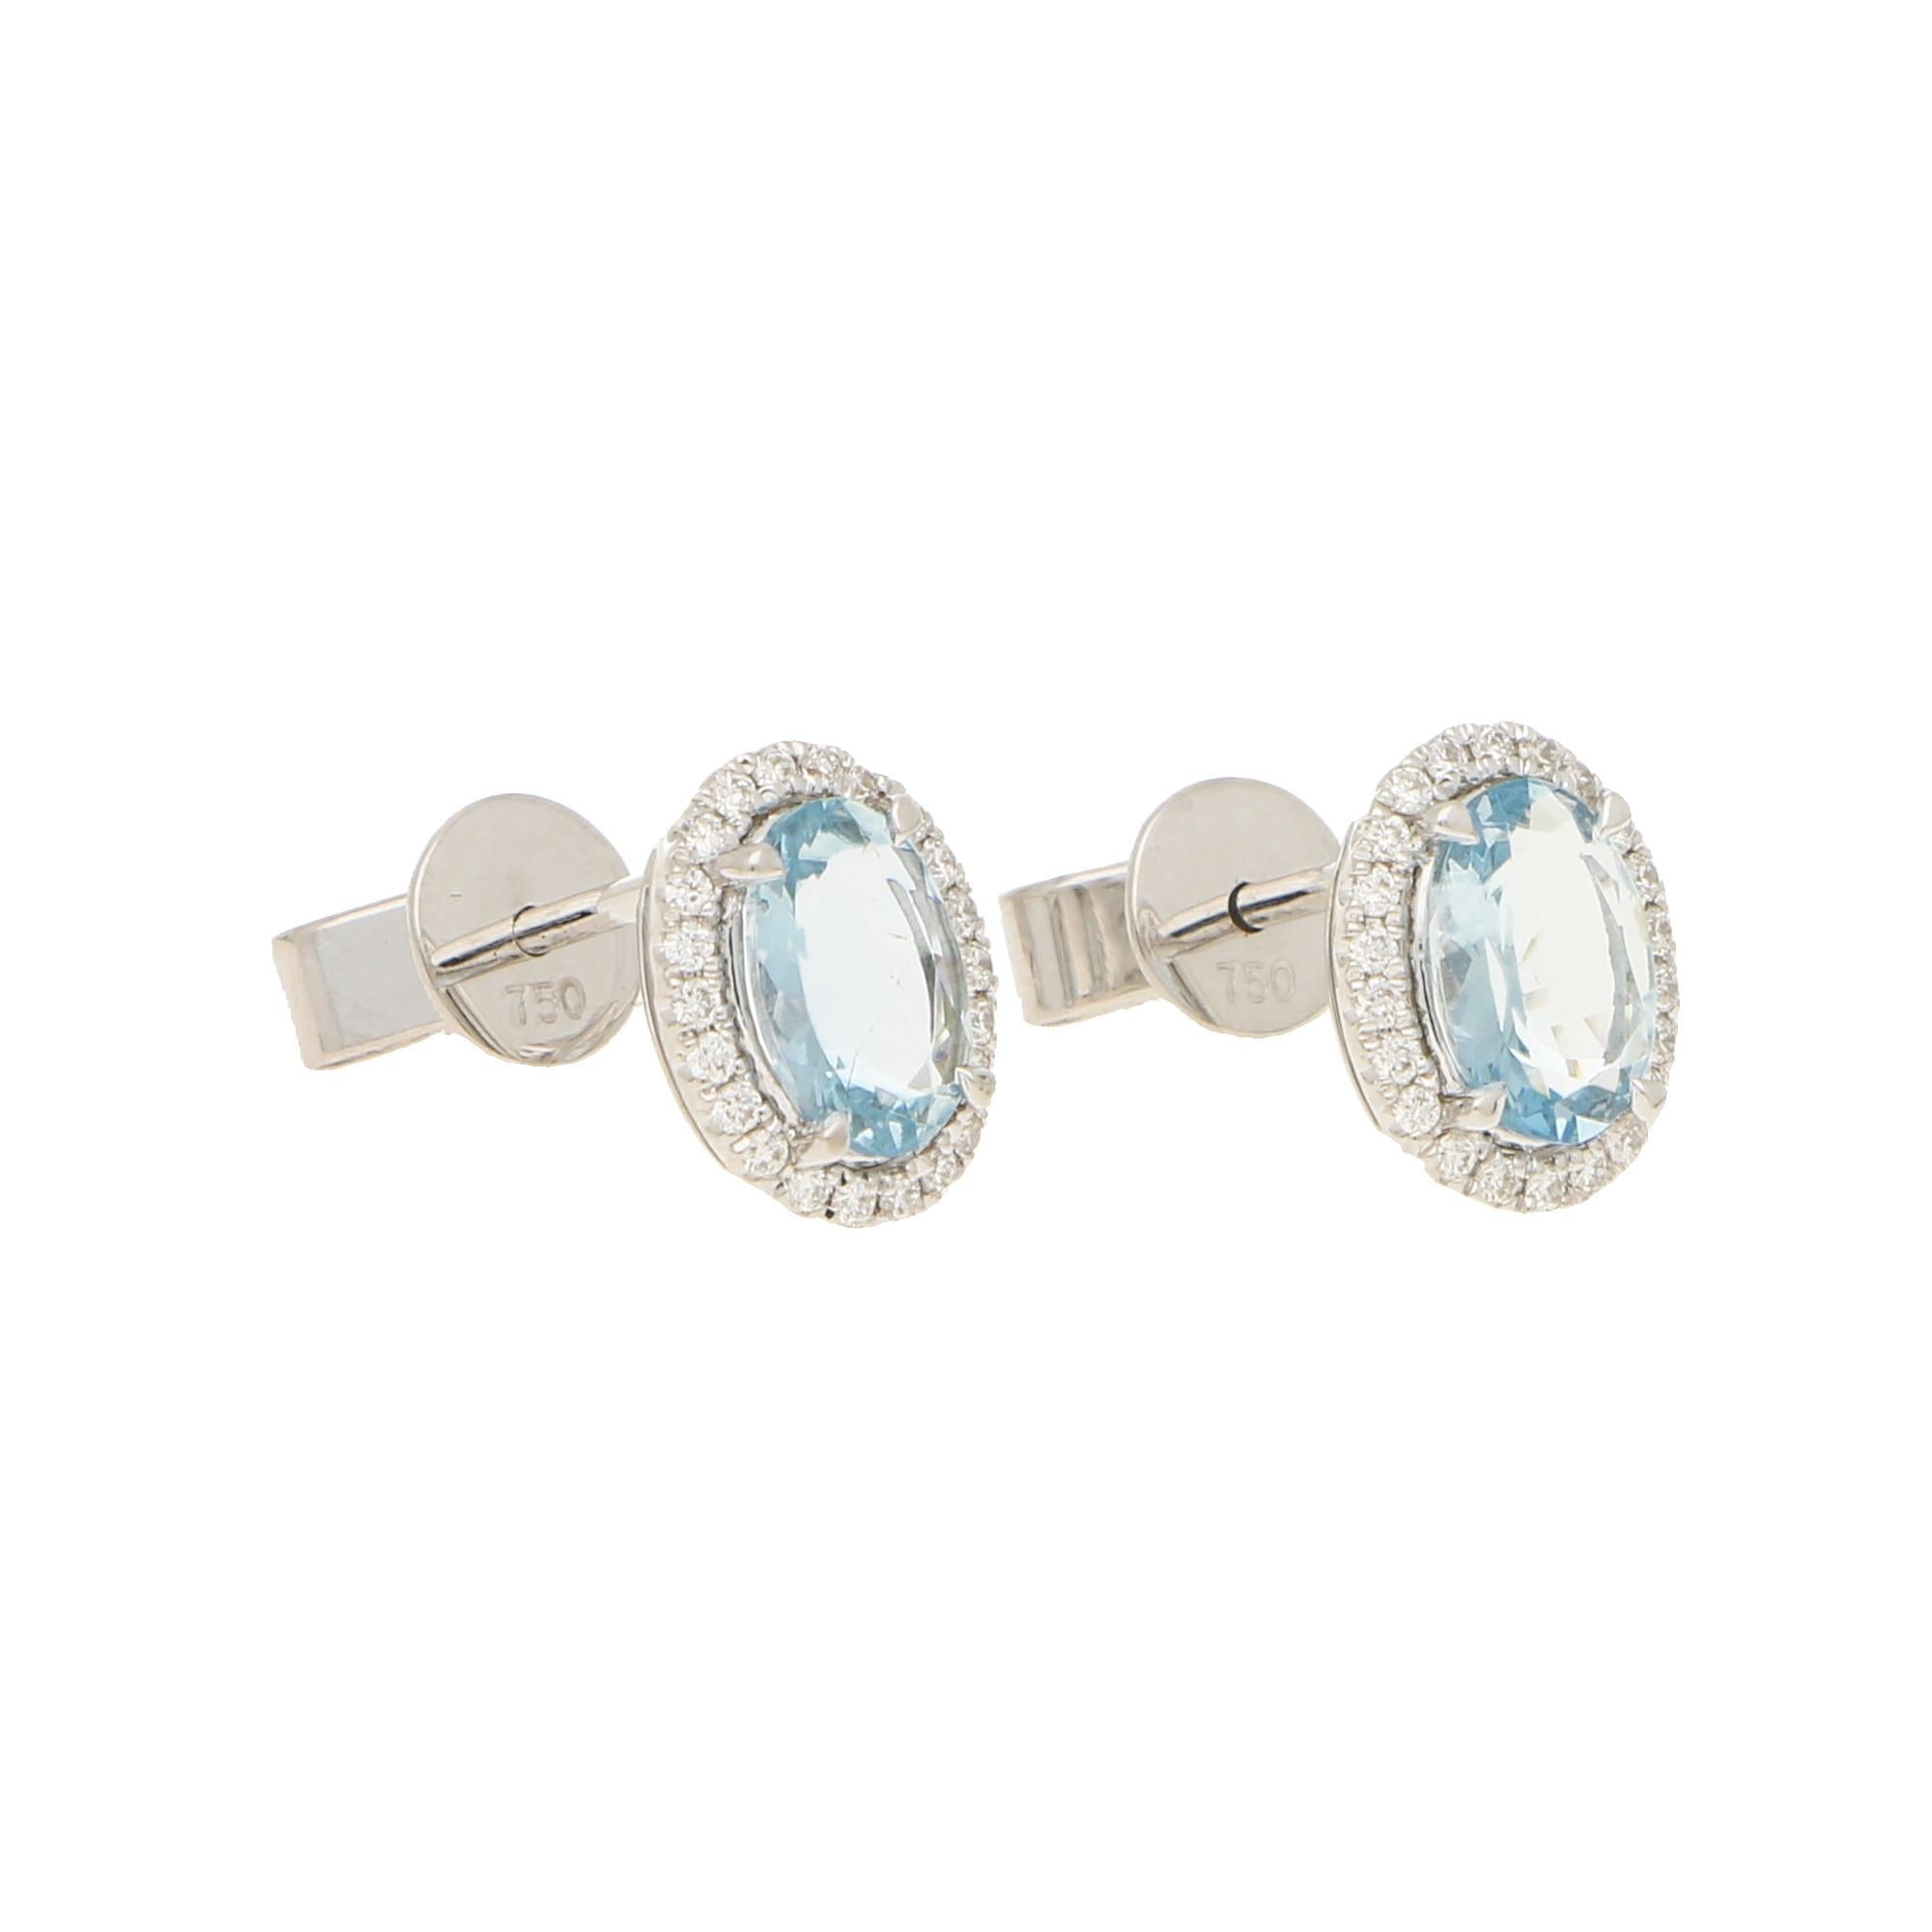 A lovely pair of aquamarine and diamond oval halo earrings set in 18k white gold.

Each earring centrally features a beautiful blue coloured oval shaped aquamarine surrounded by a halo of 22 round brilliant-cut diamonds. All of the stones are set to